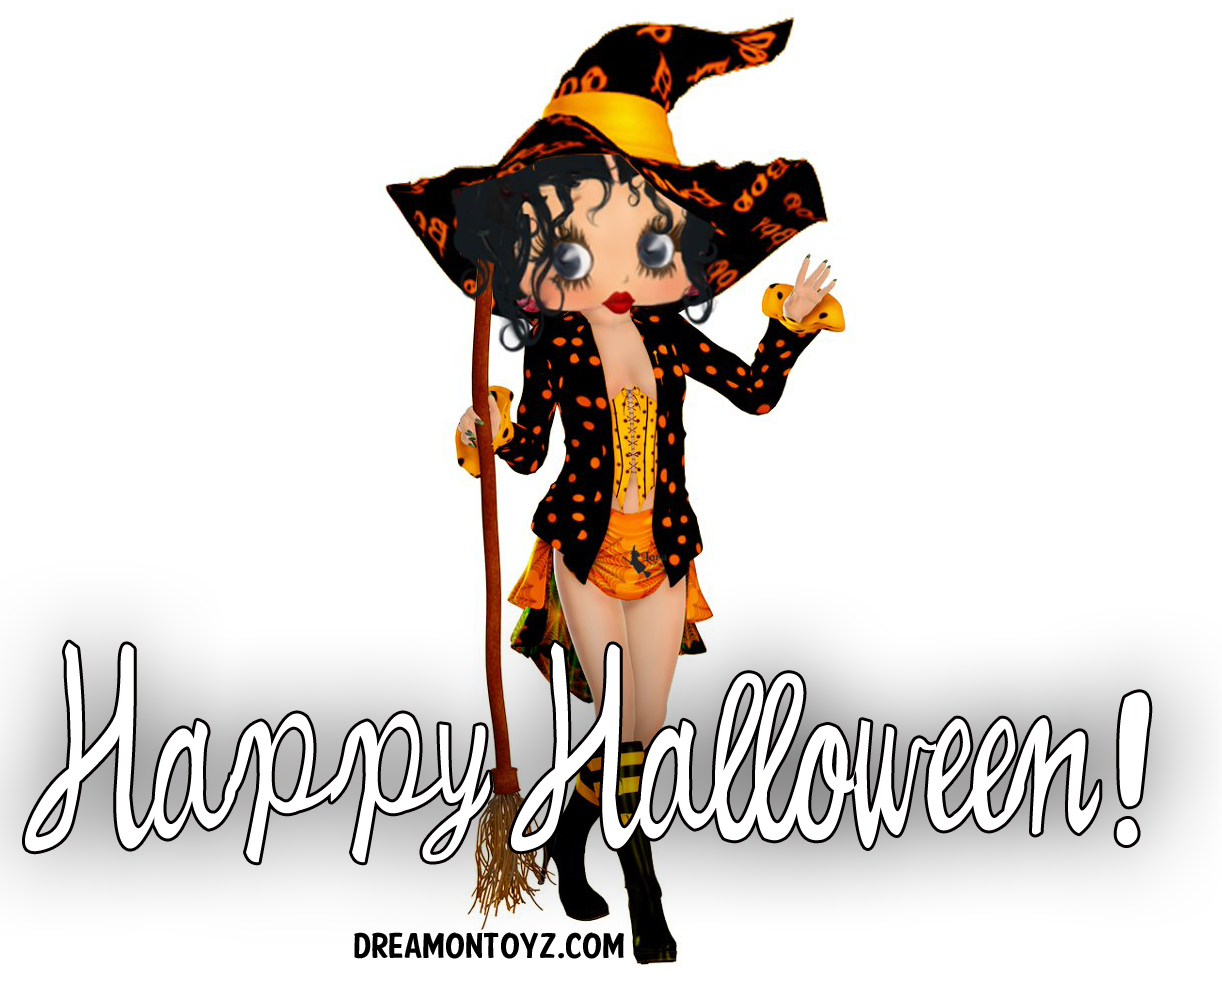 Betty Boop Pictures Archive Witch Betty Boop Halloween greetings 1222x991